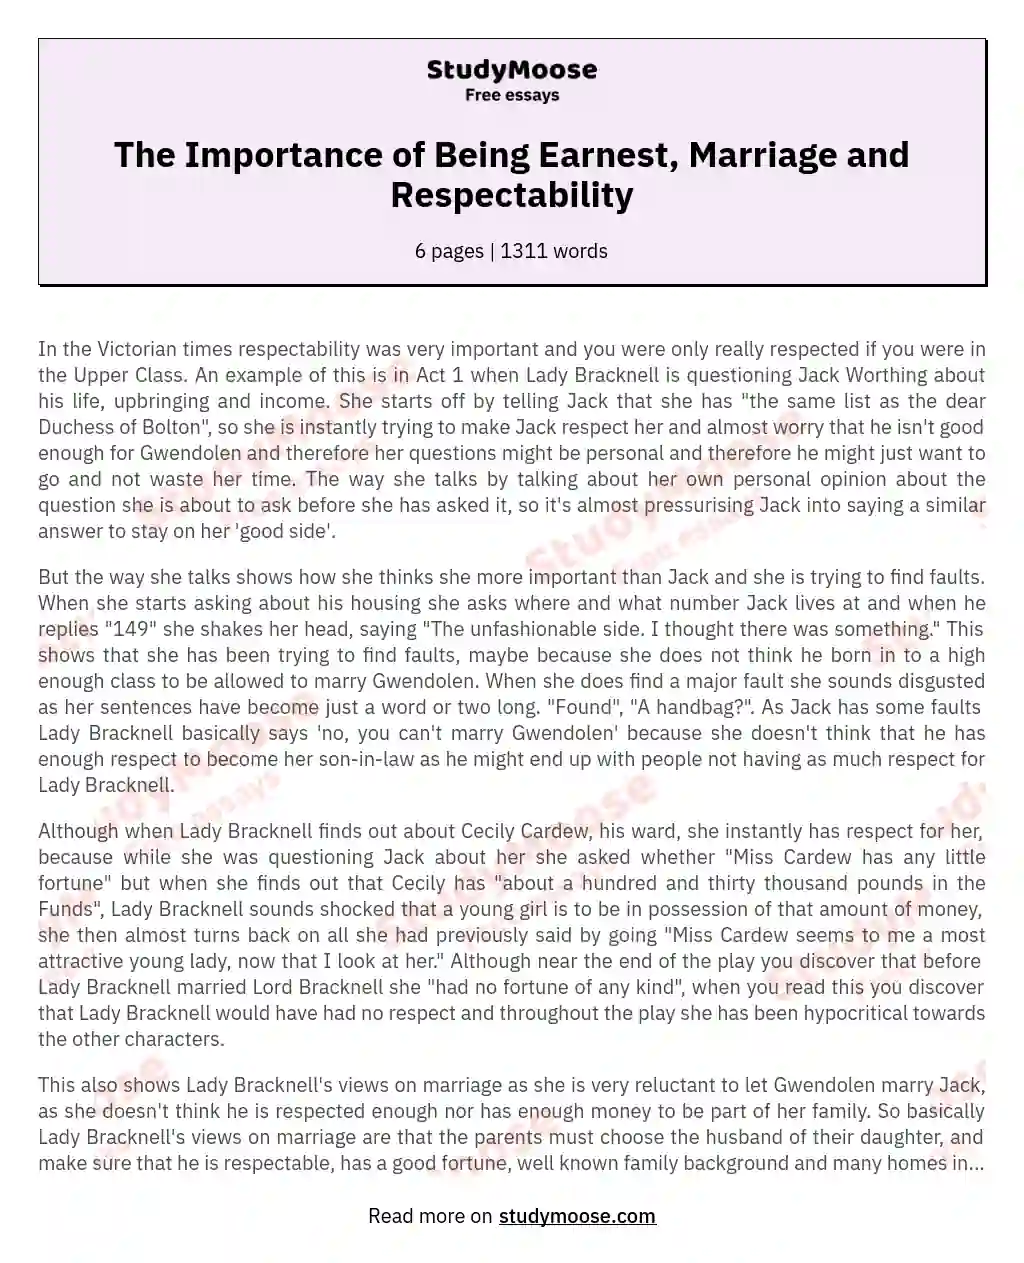 The Importance of Being Earnest, Marriage and Respectability essay